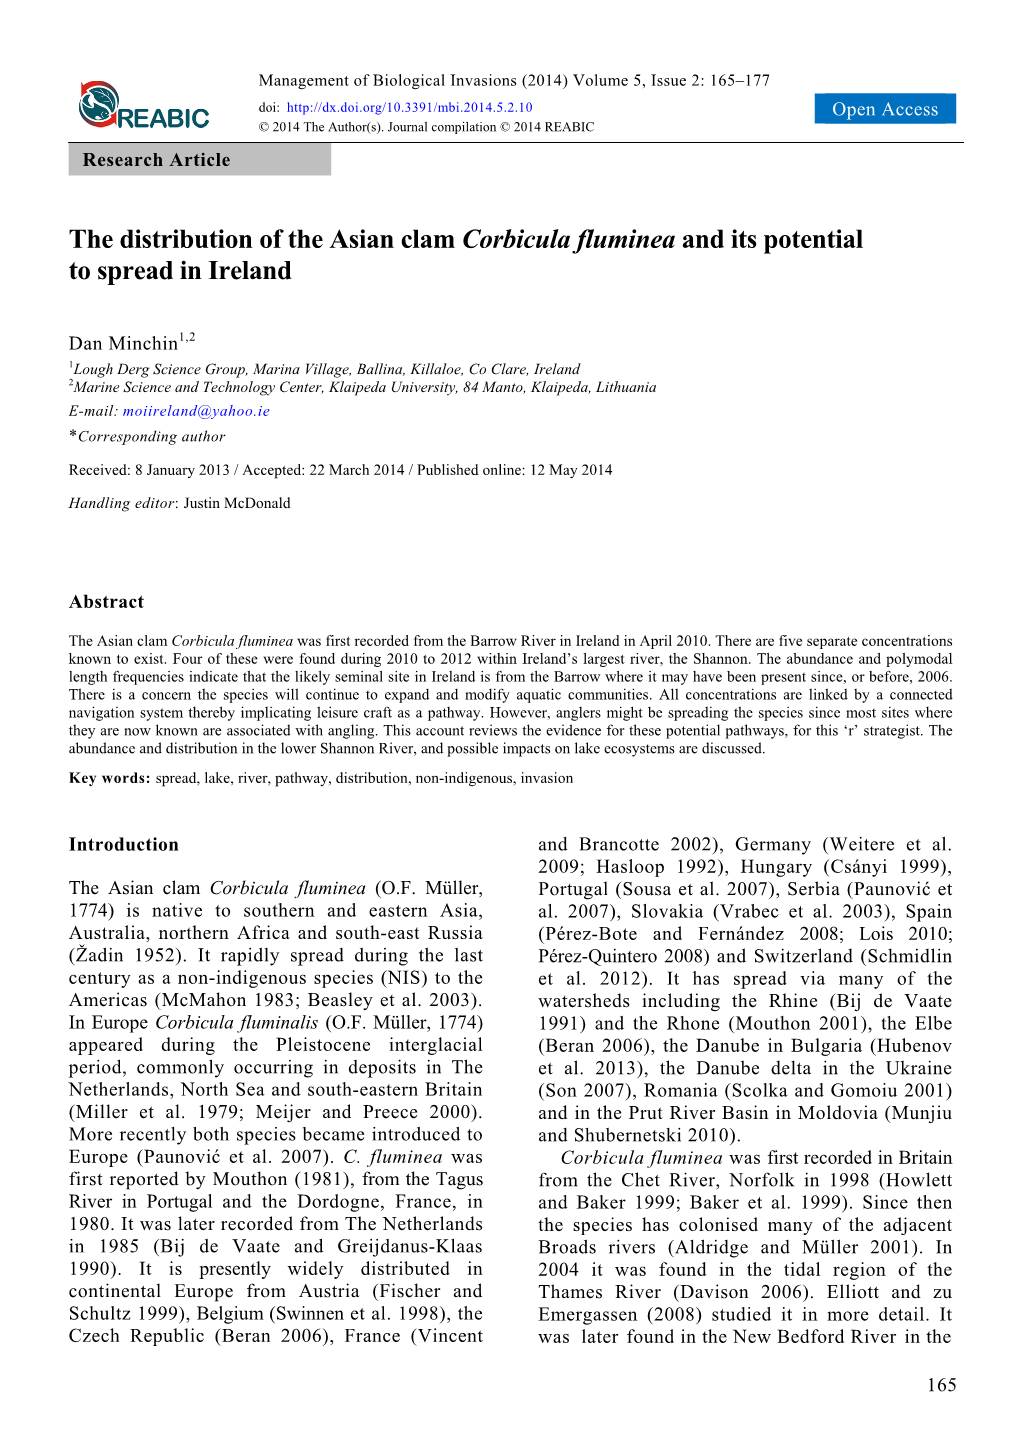 The Distribution of the Asian Clam Corbicula Fluminea and Its Potential to Spread in Ireland